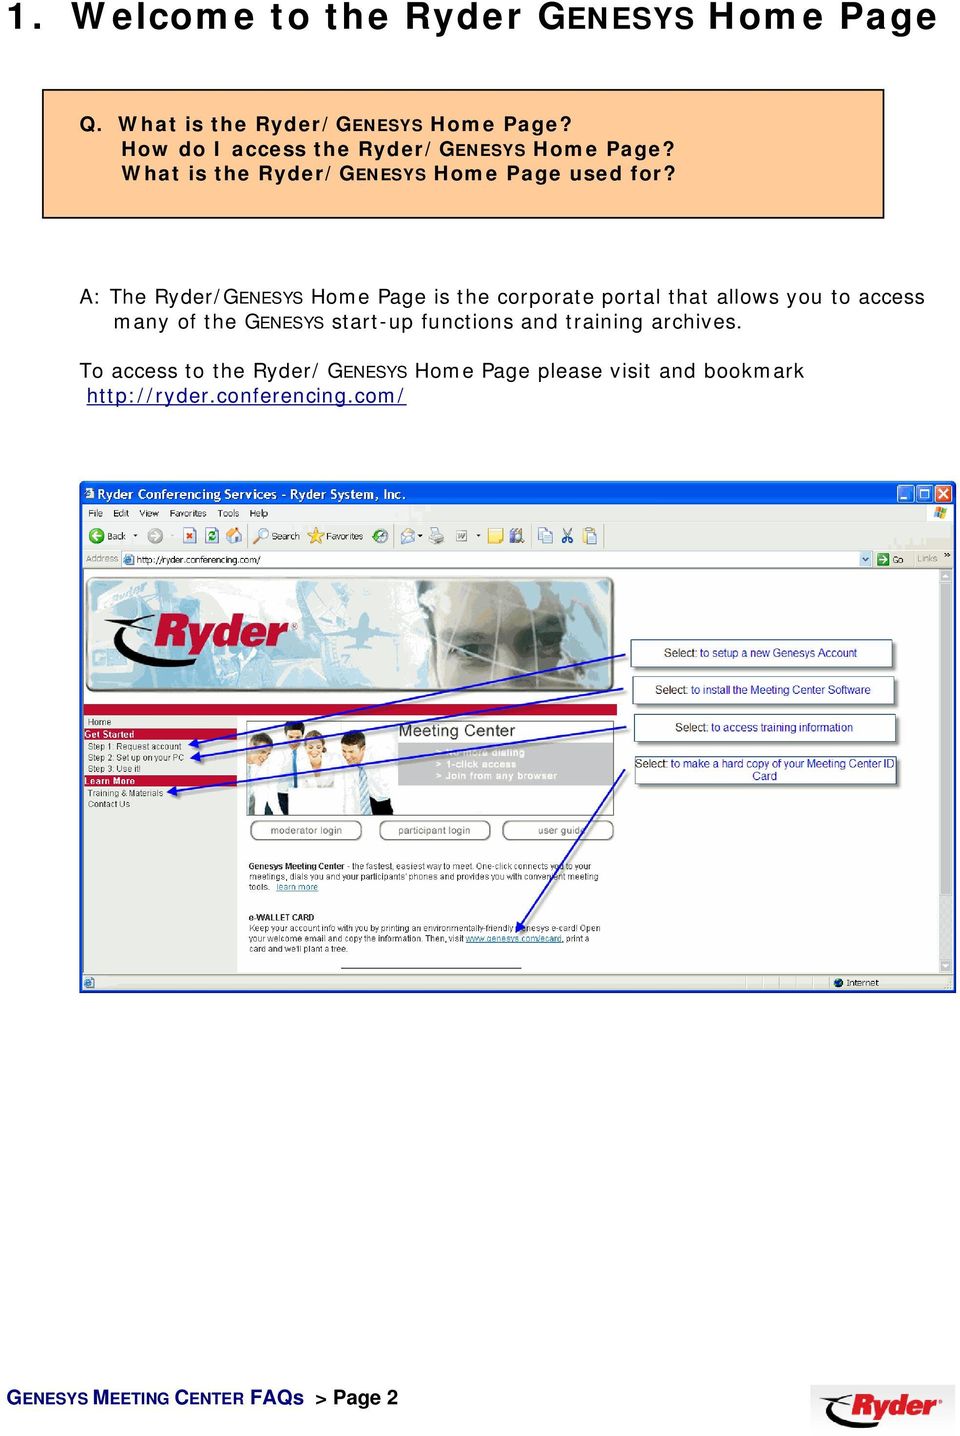 A: The Ryder/GENESYS Home Page is the corporate portal that allows you to access many of the GENESYS start-up